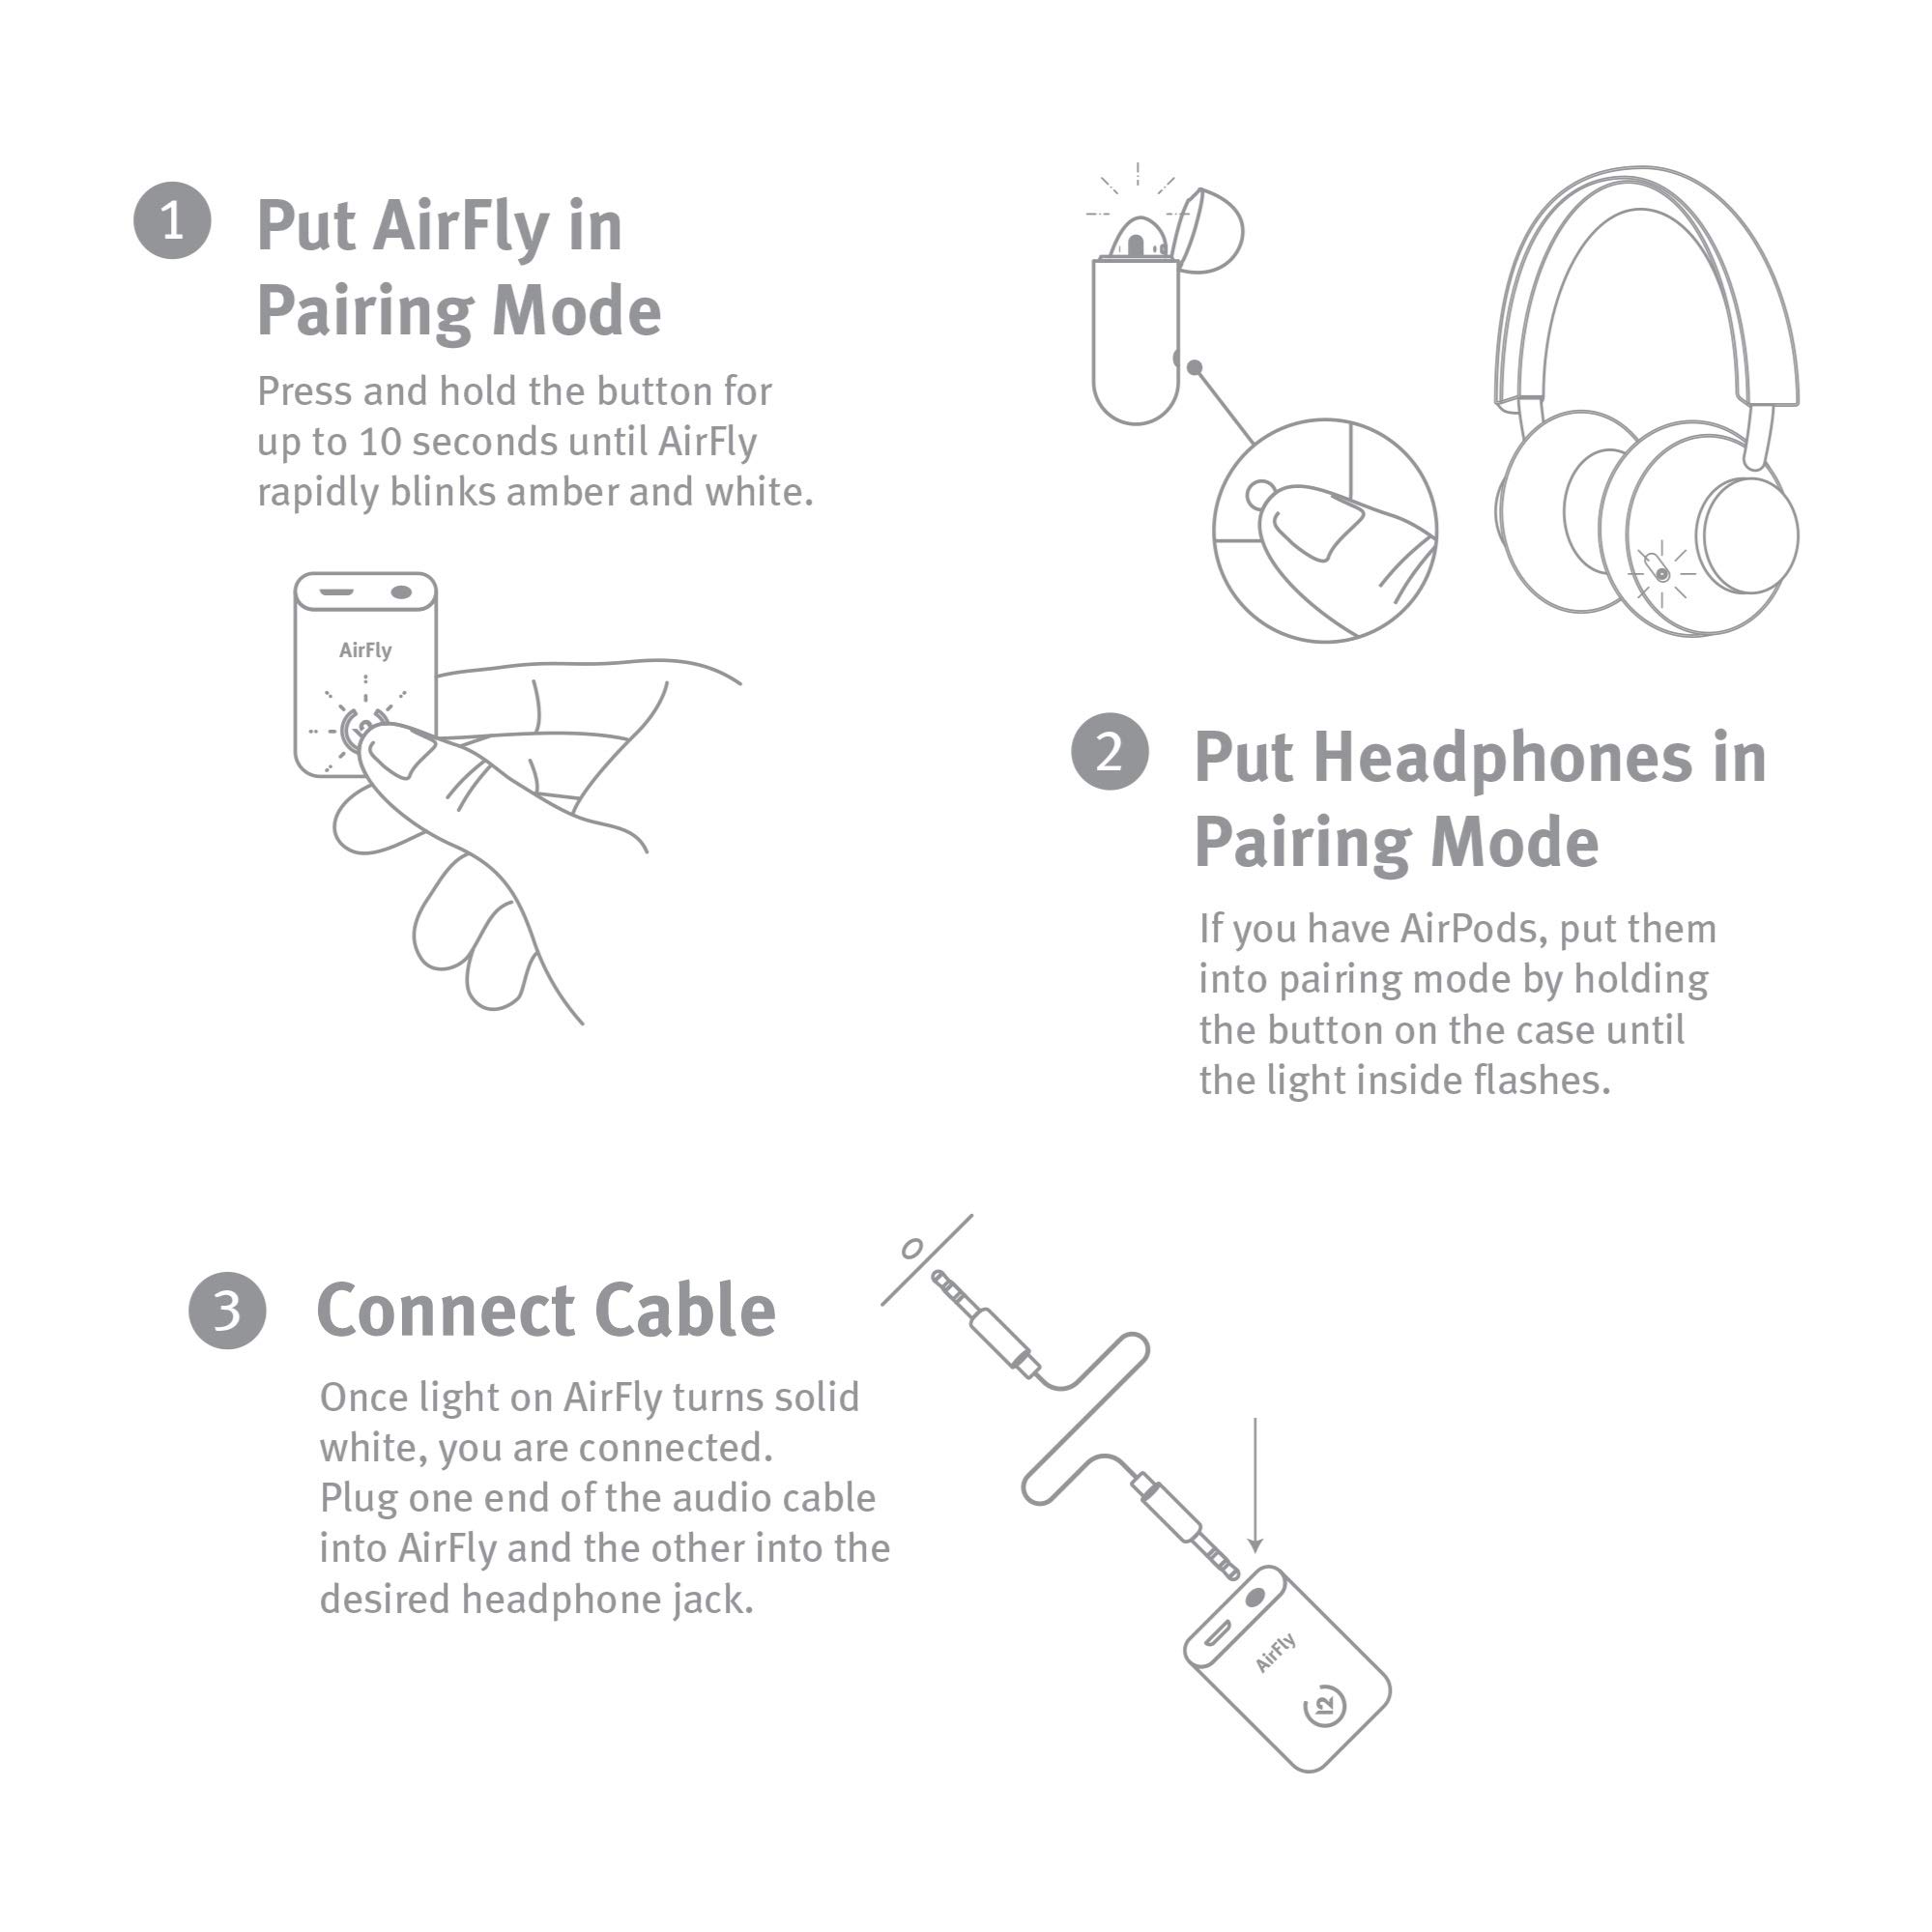 Twelve South AirFly | Wireless transmitter to use Wireless/Noise-cancelling headphones in gyms or on airplanes